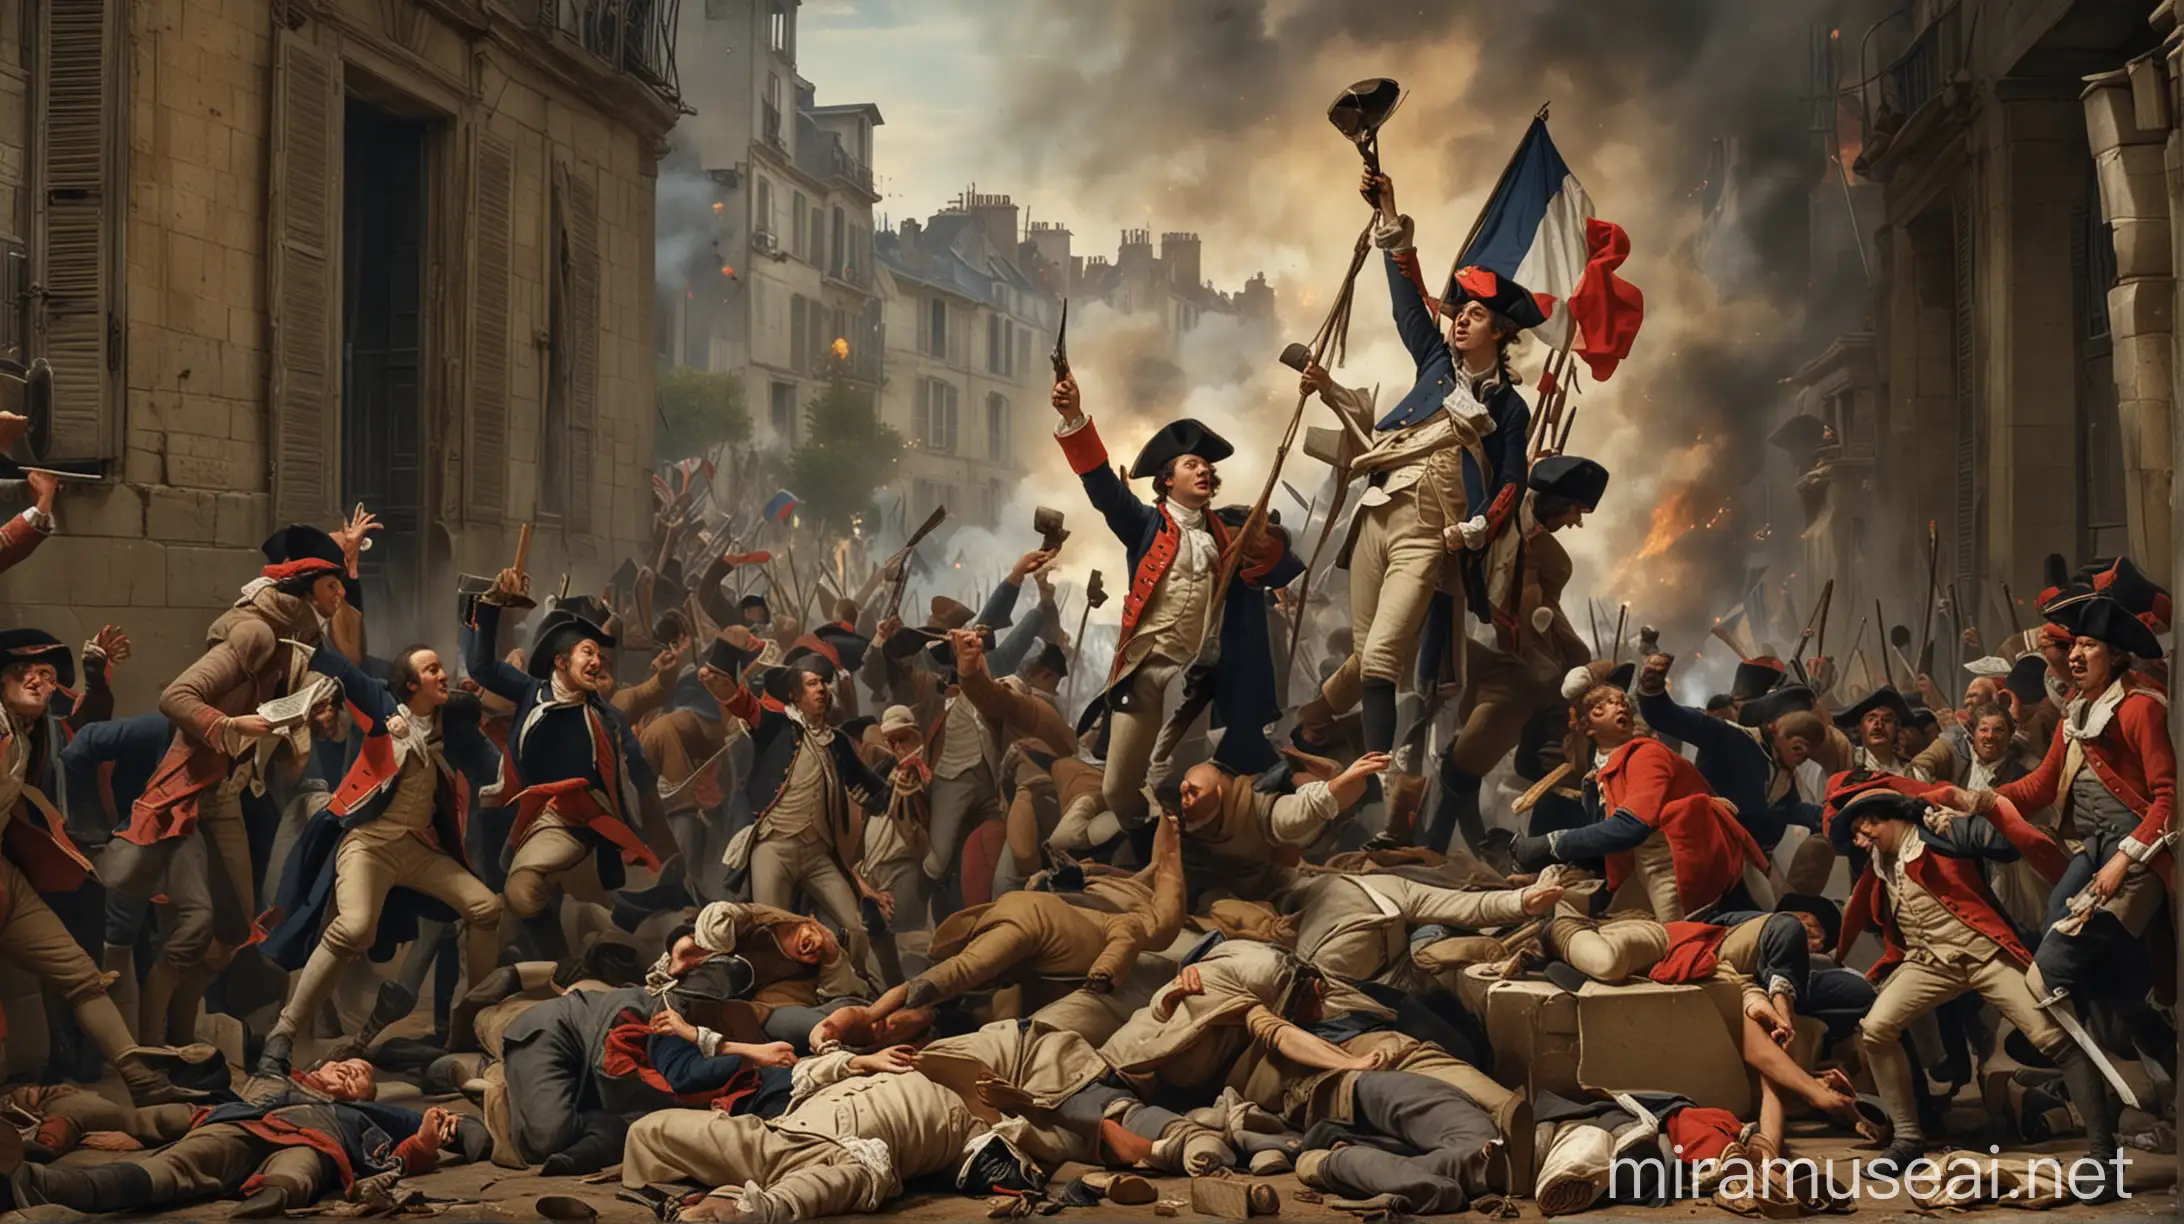 The French Revolution Storming of the Bastille and Declaration of Rights